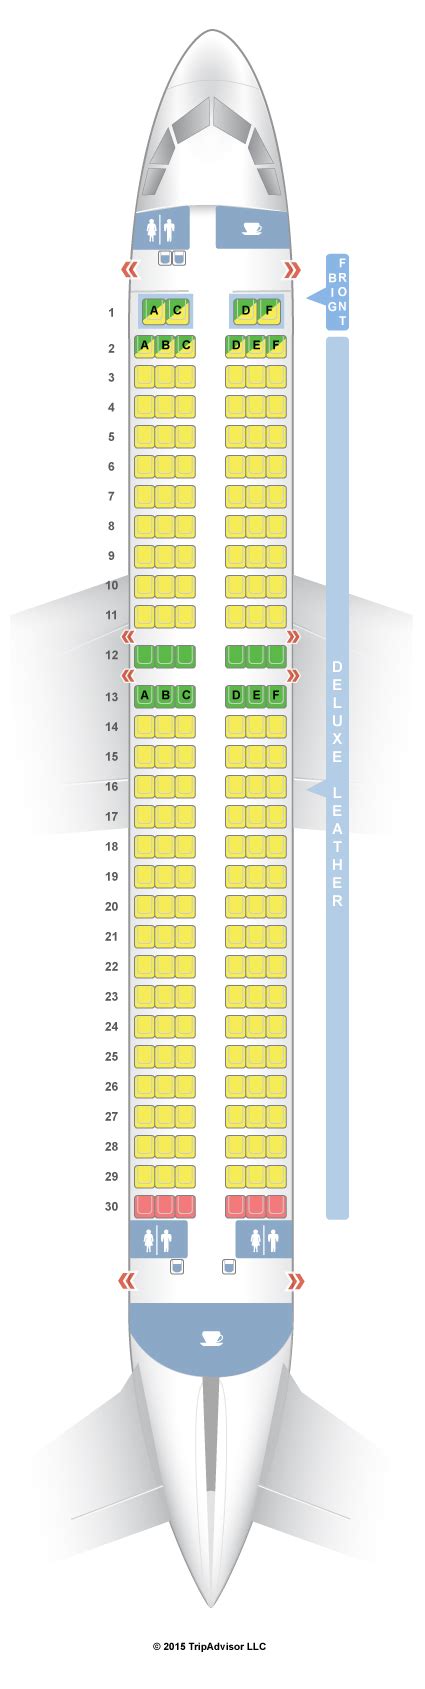 Economy. Seats174. Pitch29". Width18". Recline3". On the Airbus A320-200 V.1, Air France offers an economy class that's tailored for regional comfort. With 174 seats, the cabin is modern and well-appointed, ensuring a pleasant flight experience. The seating is practical, and a range of in-flight entertainment options keeps passengers engaged..